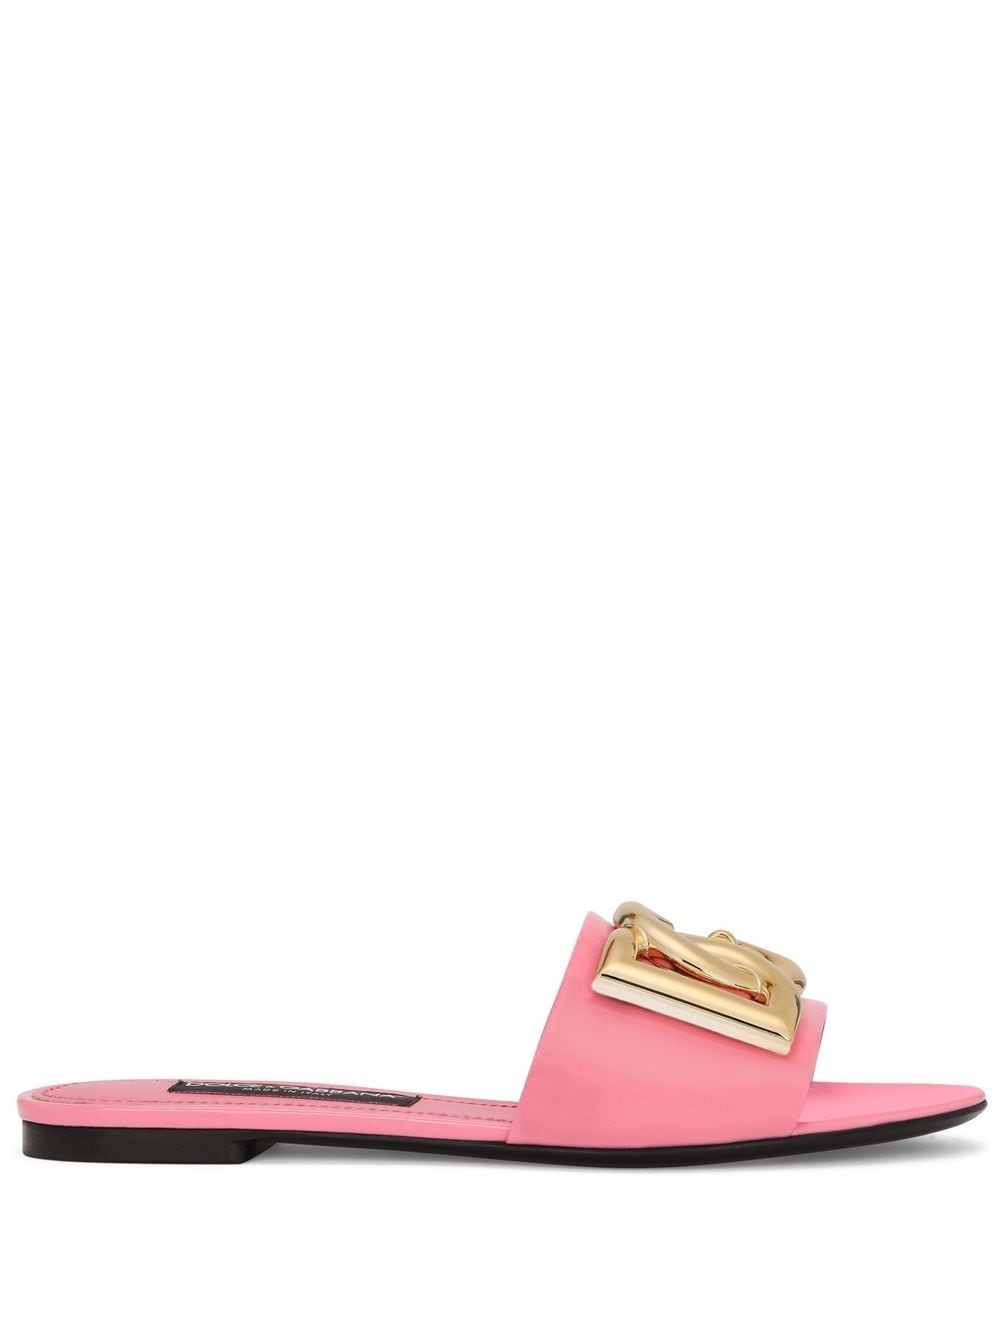 Dolce & Gabbana Dg-logo Patent Leather Sandals In Pink